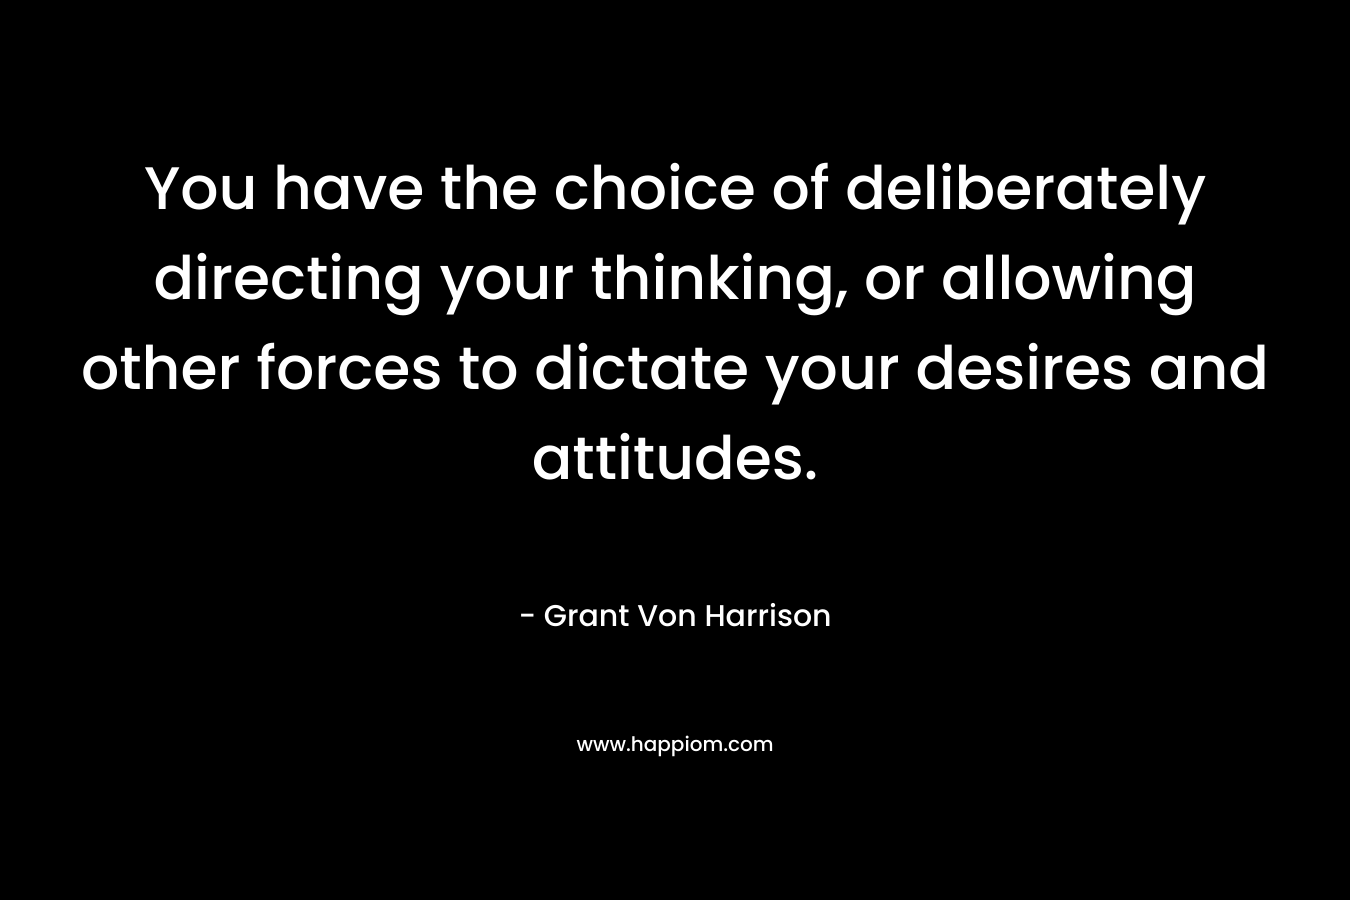 You have the choice of deliberately directing your thinking, or allowing other forces to dictate your desires and attitudes.